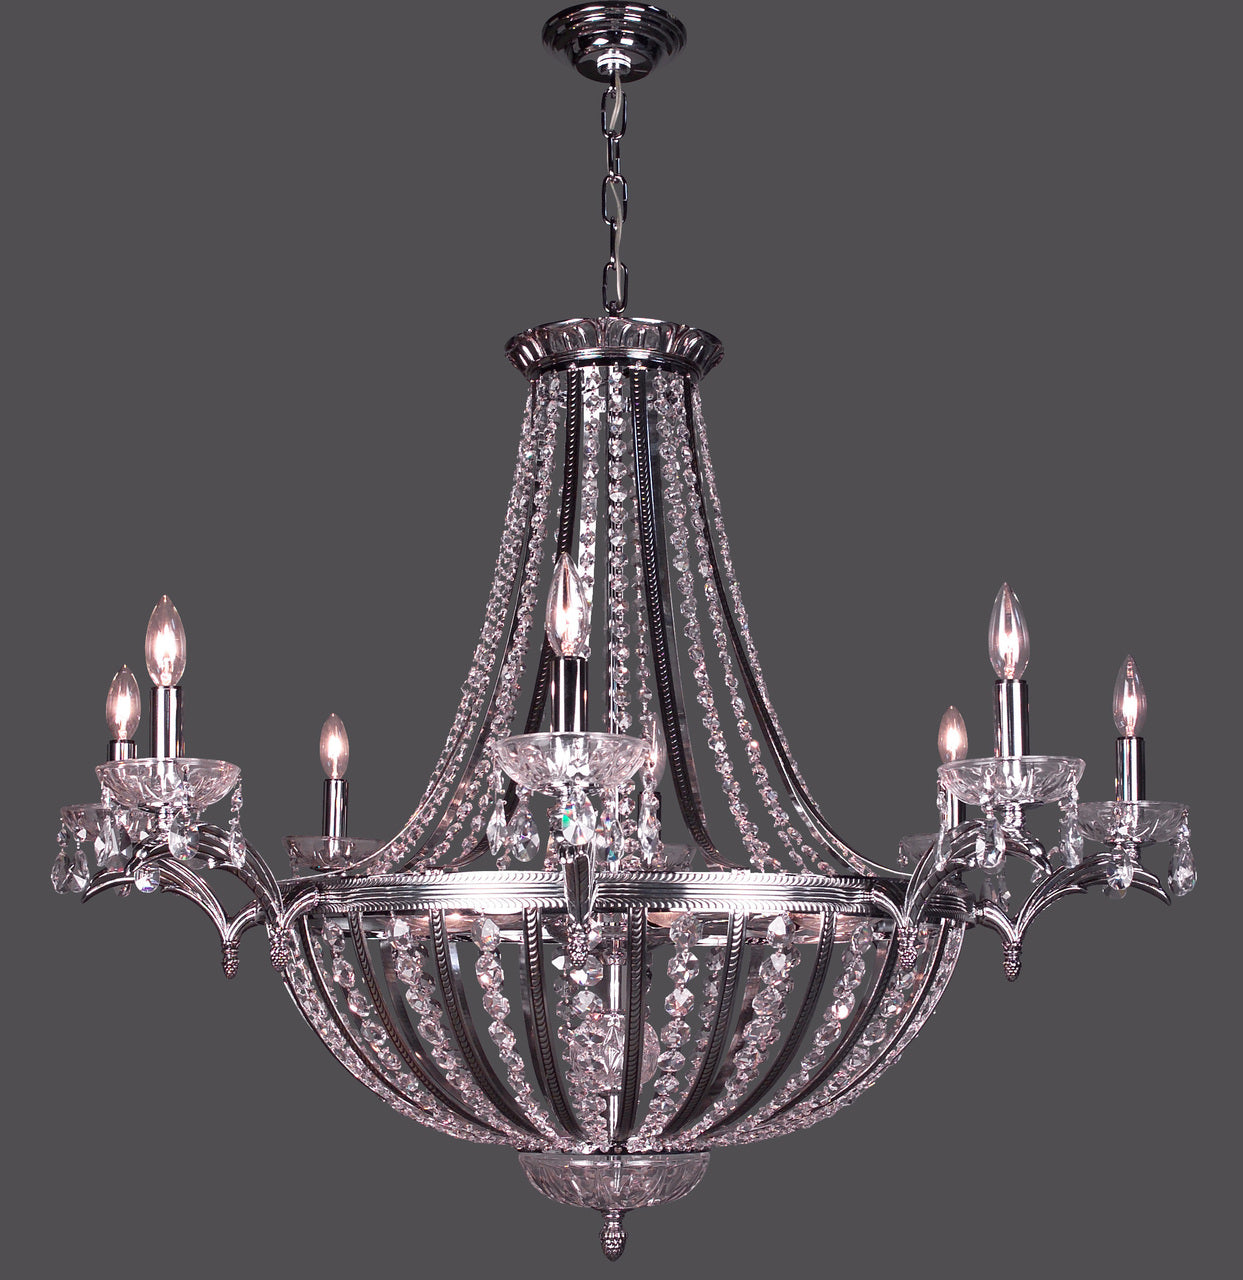 Classic Lighting 1928 CHB CP Terragona Crystal Chandelier in Chrome/Black Patina (Imported from Spain)